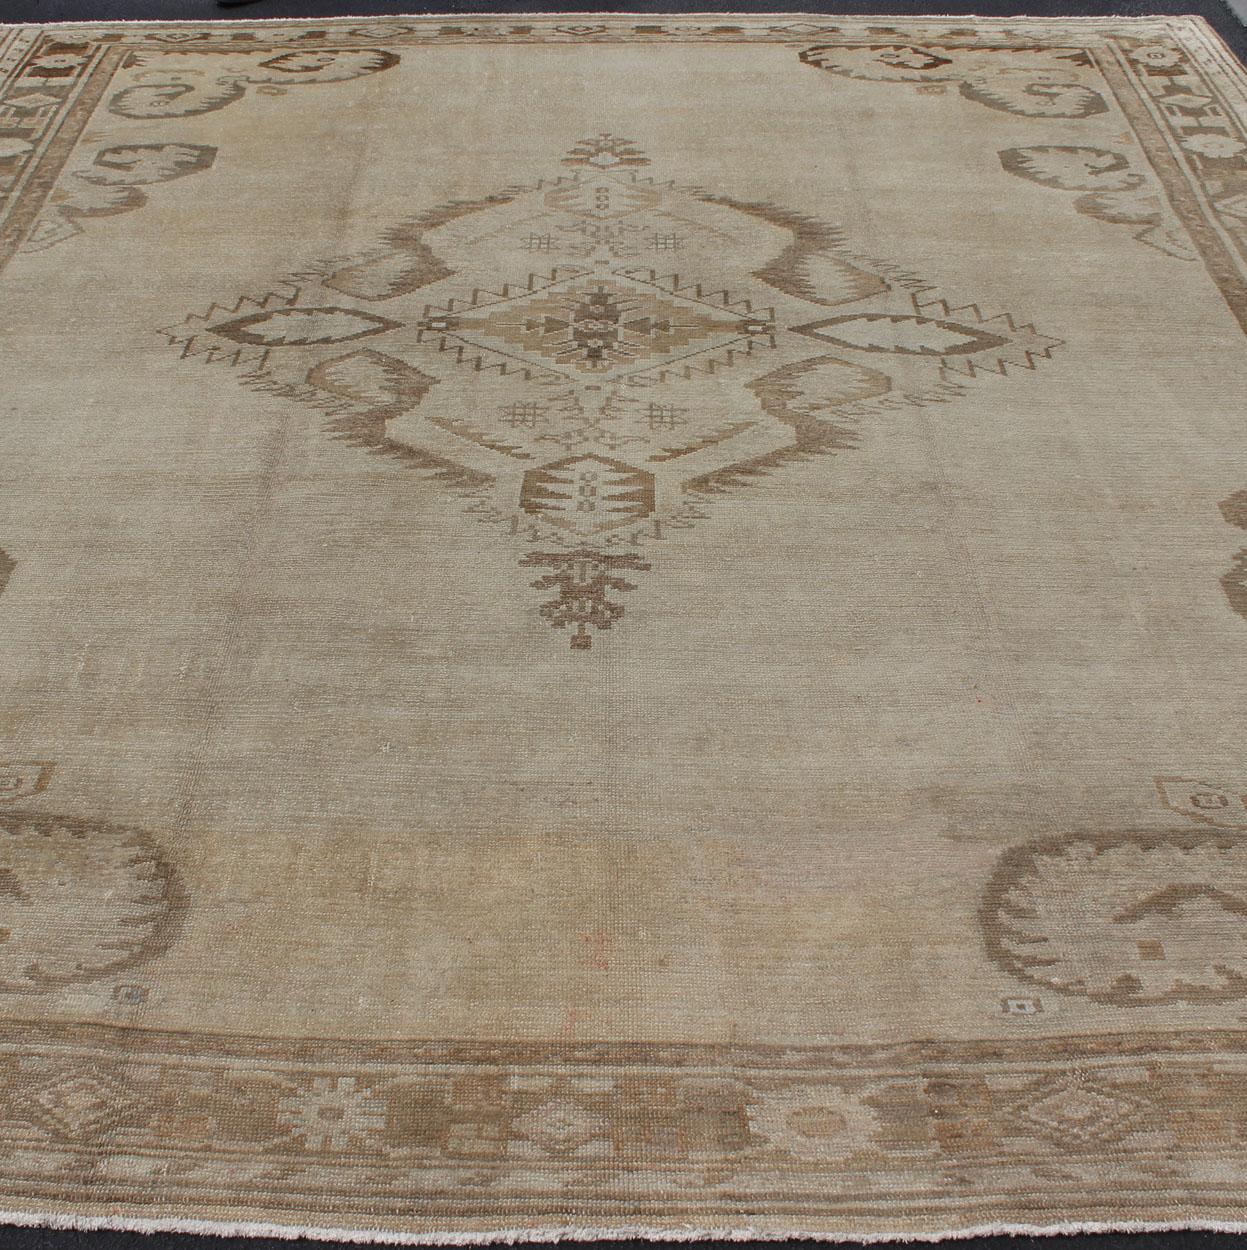 Large Square Size Vintage Turkish Oushak Rug in Earthy Tones With Medallion For Sale 1